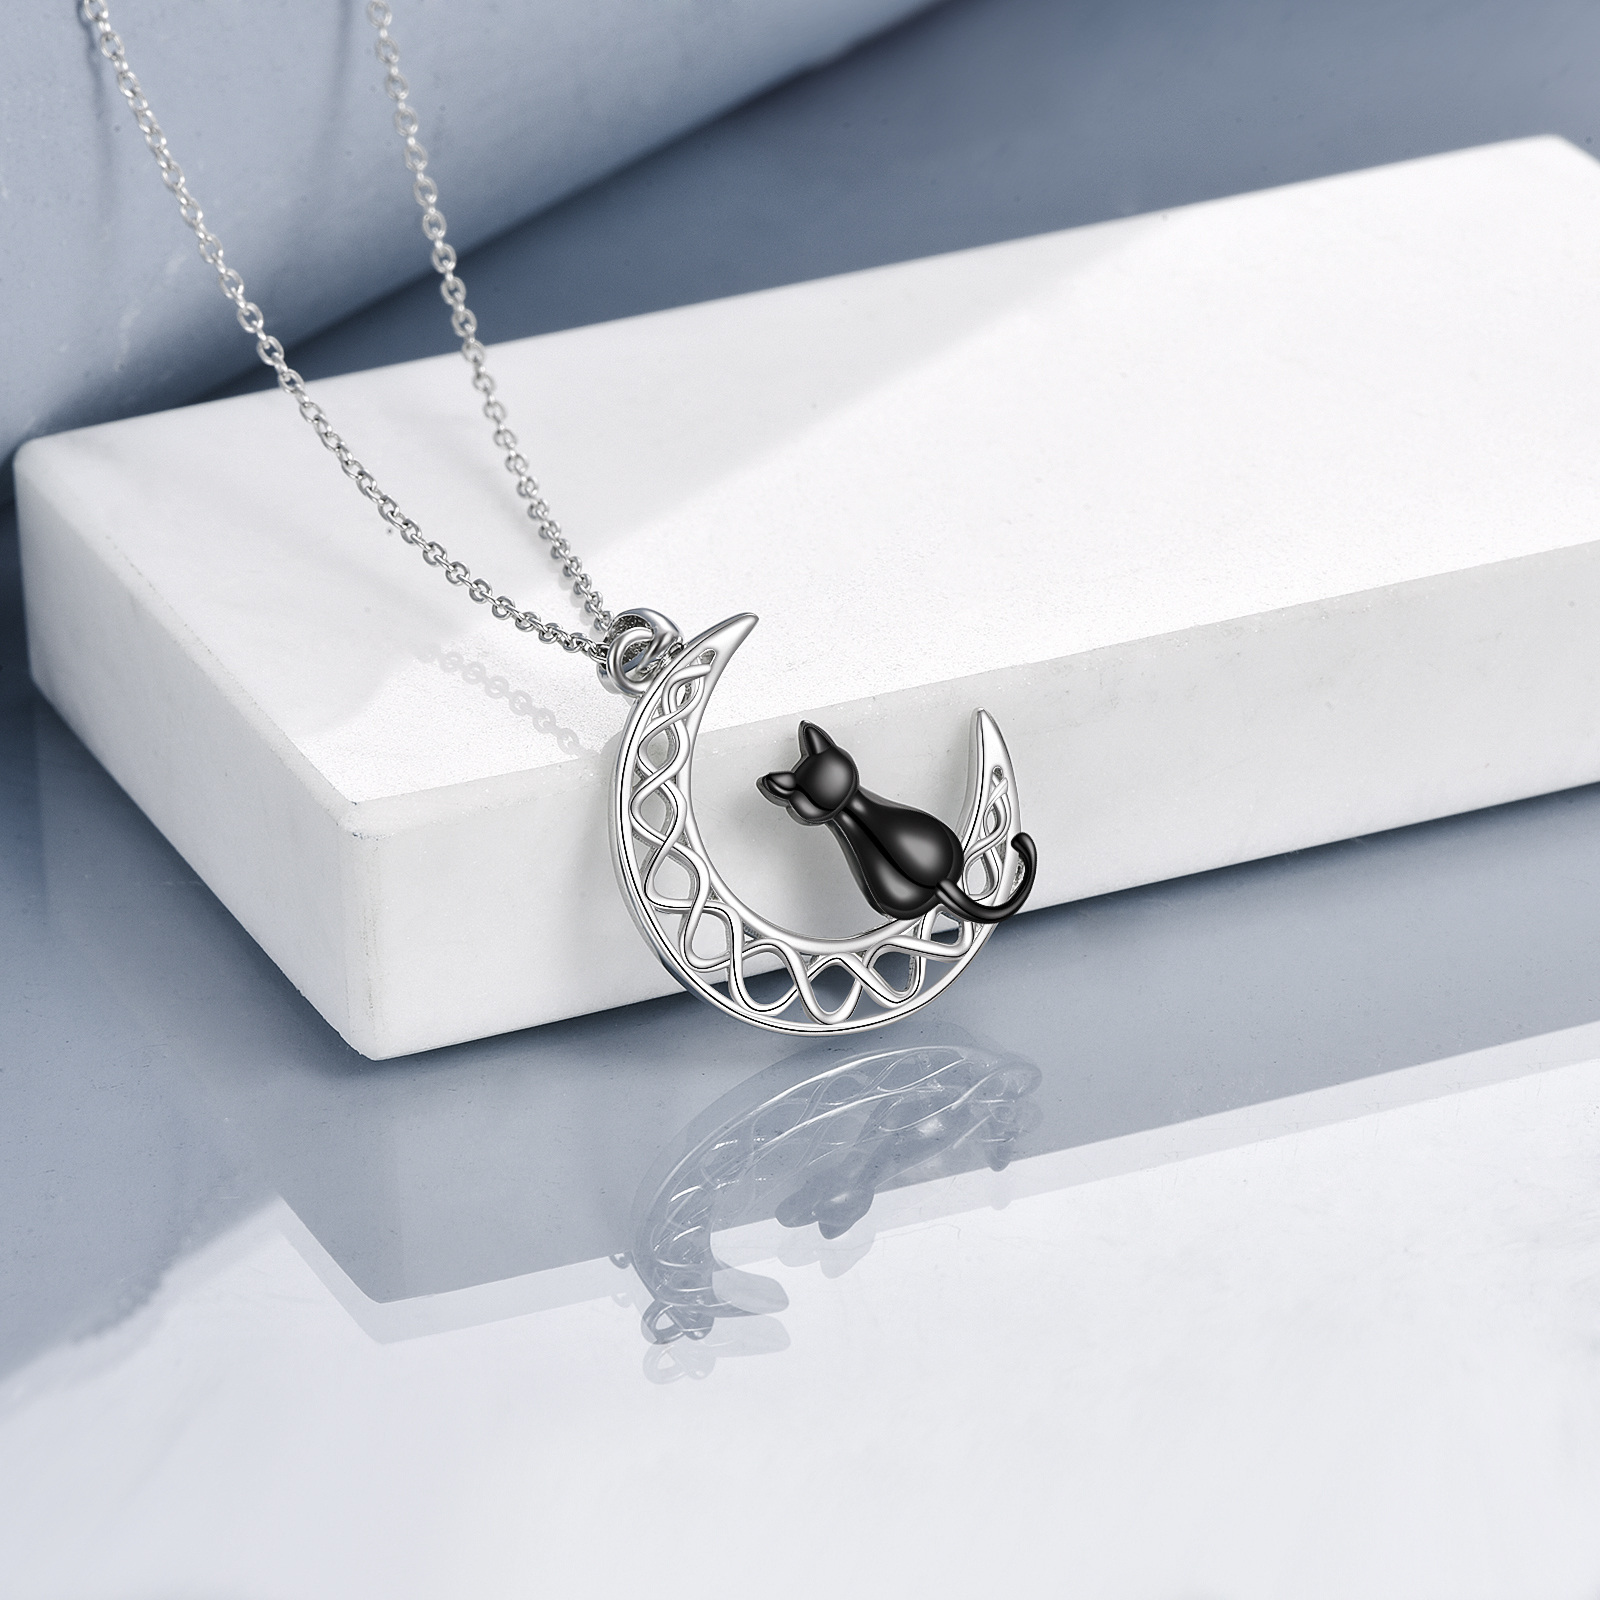 1626934841275429c32 - Celtic Moon Cat Necklace for Girls Sterling Silver Irish Jewelry